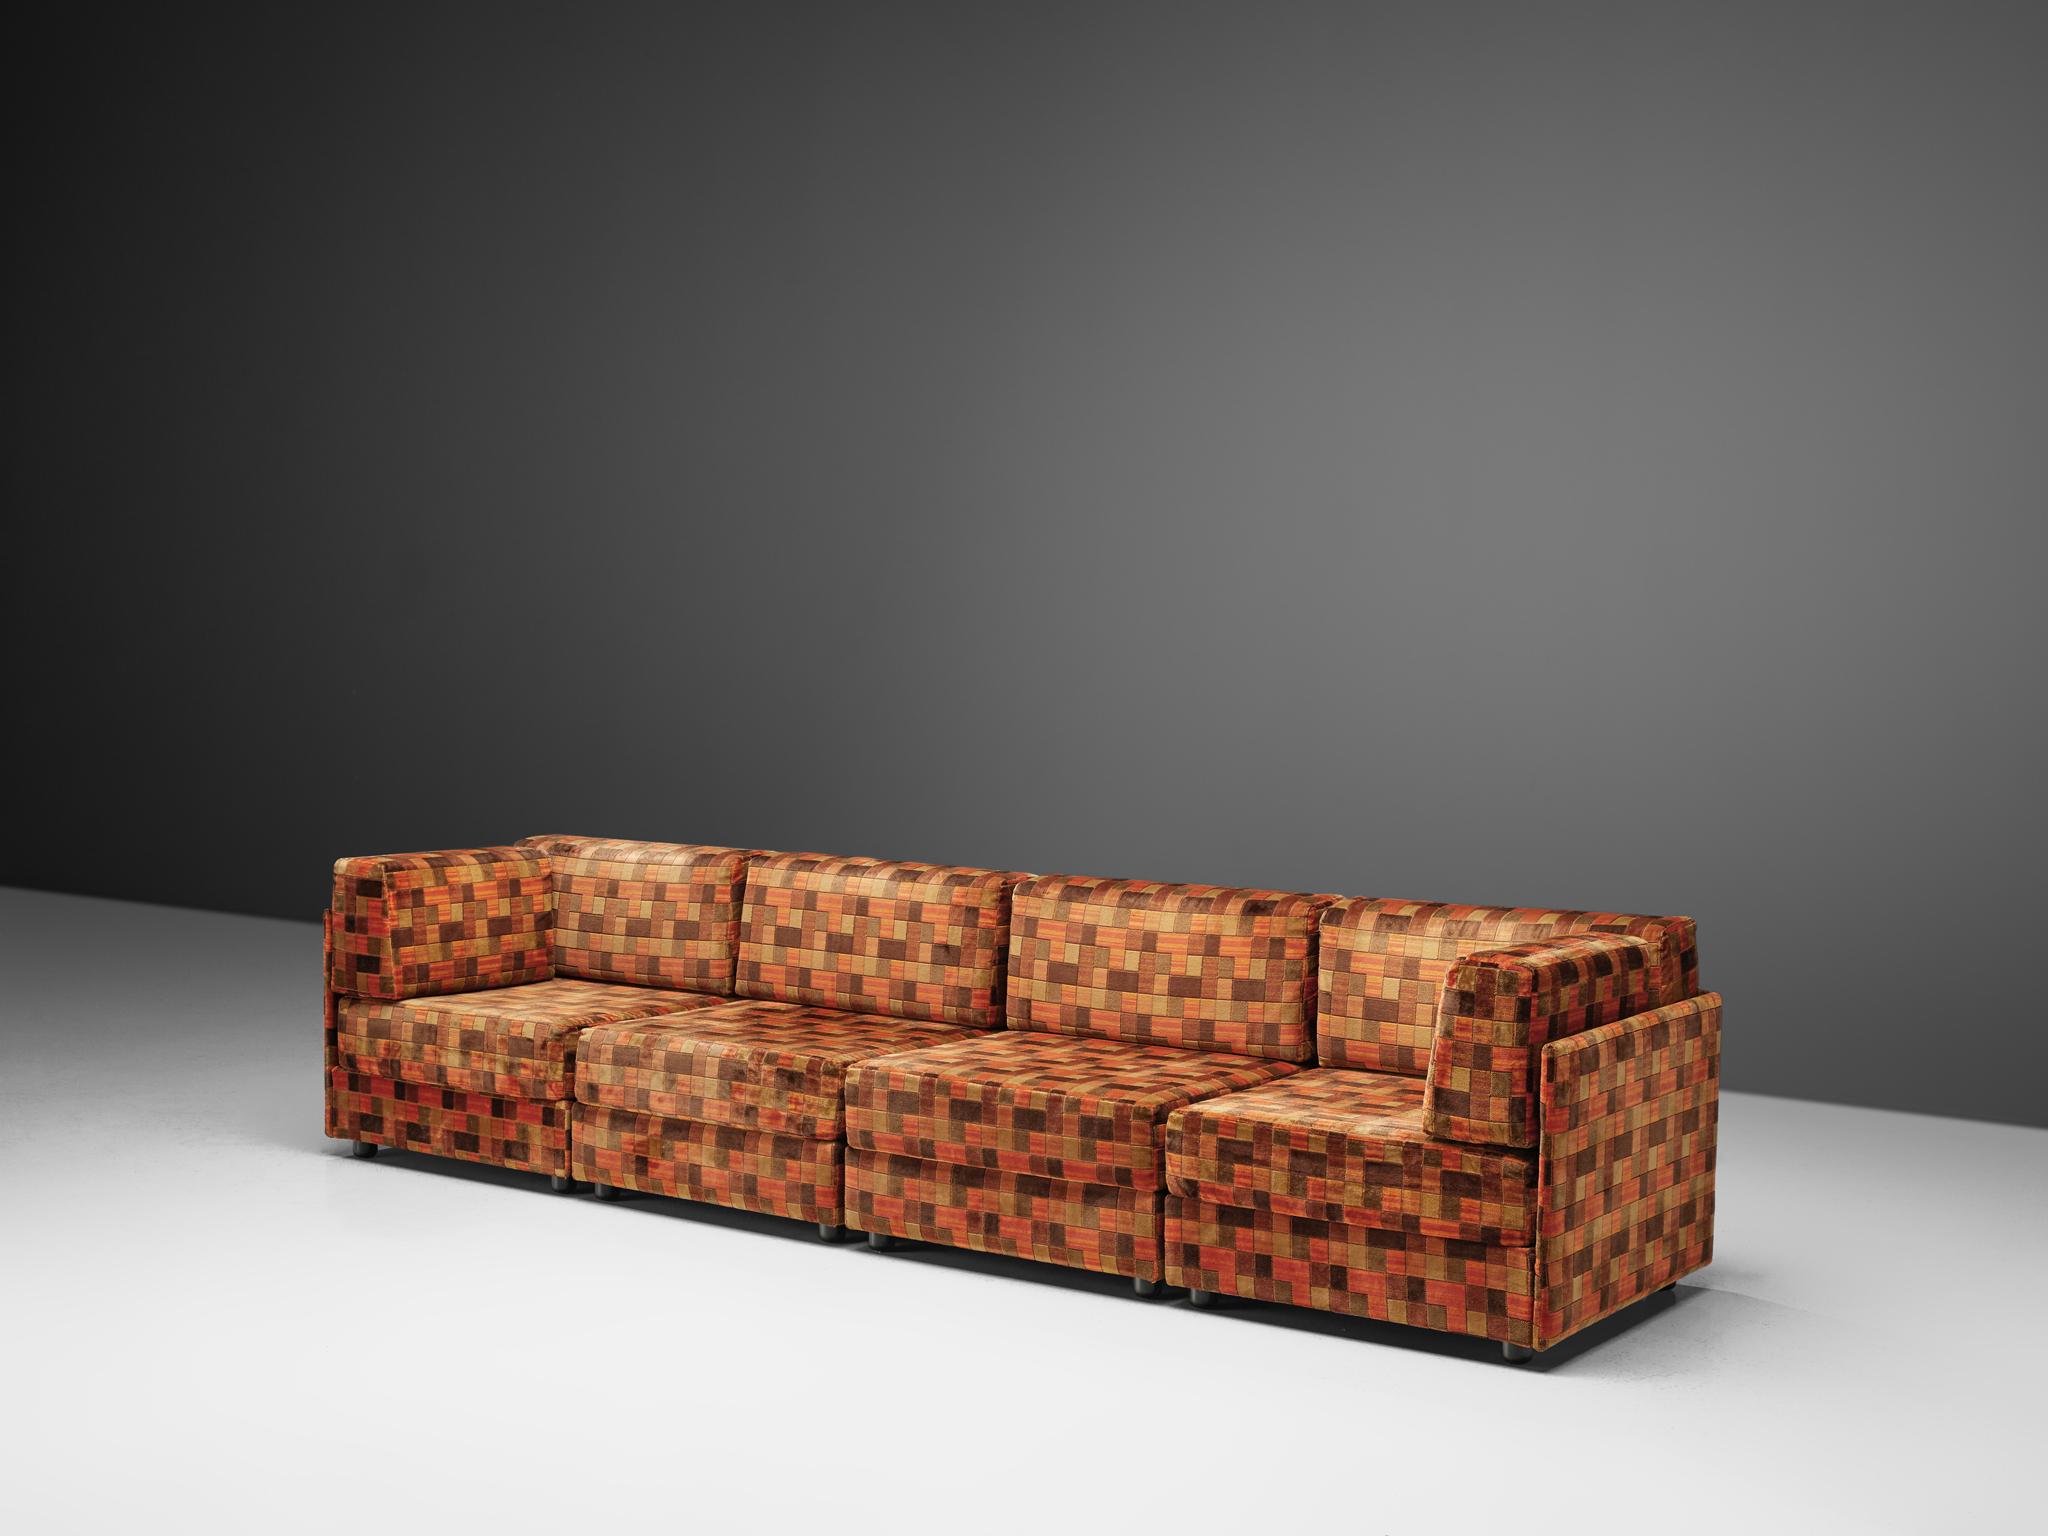 Sectional sofa, orange/brown fabric, Italy, 1970s.

This large sectional sofa contains two corner elements and two straight elements, this makes it possible to arrange this sofa to your own wishes. The design is simplistic and angular, yet very